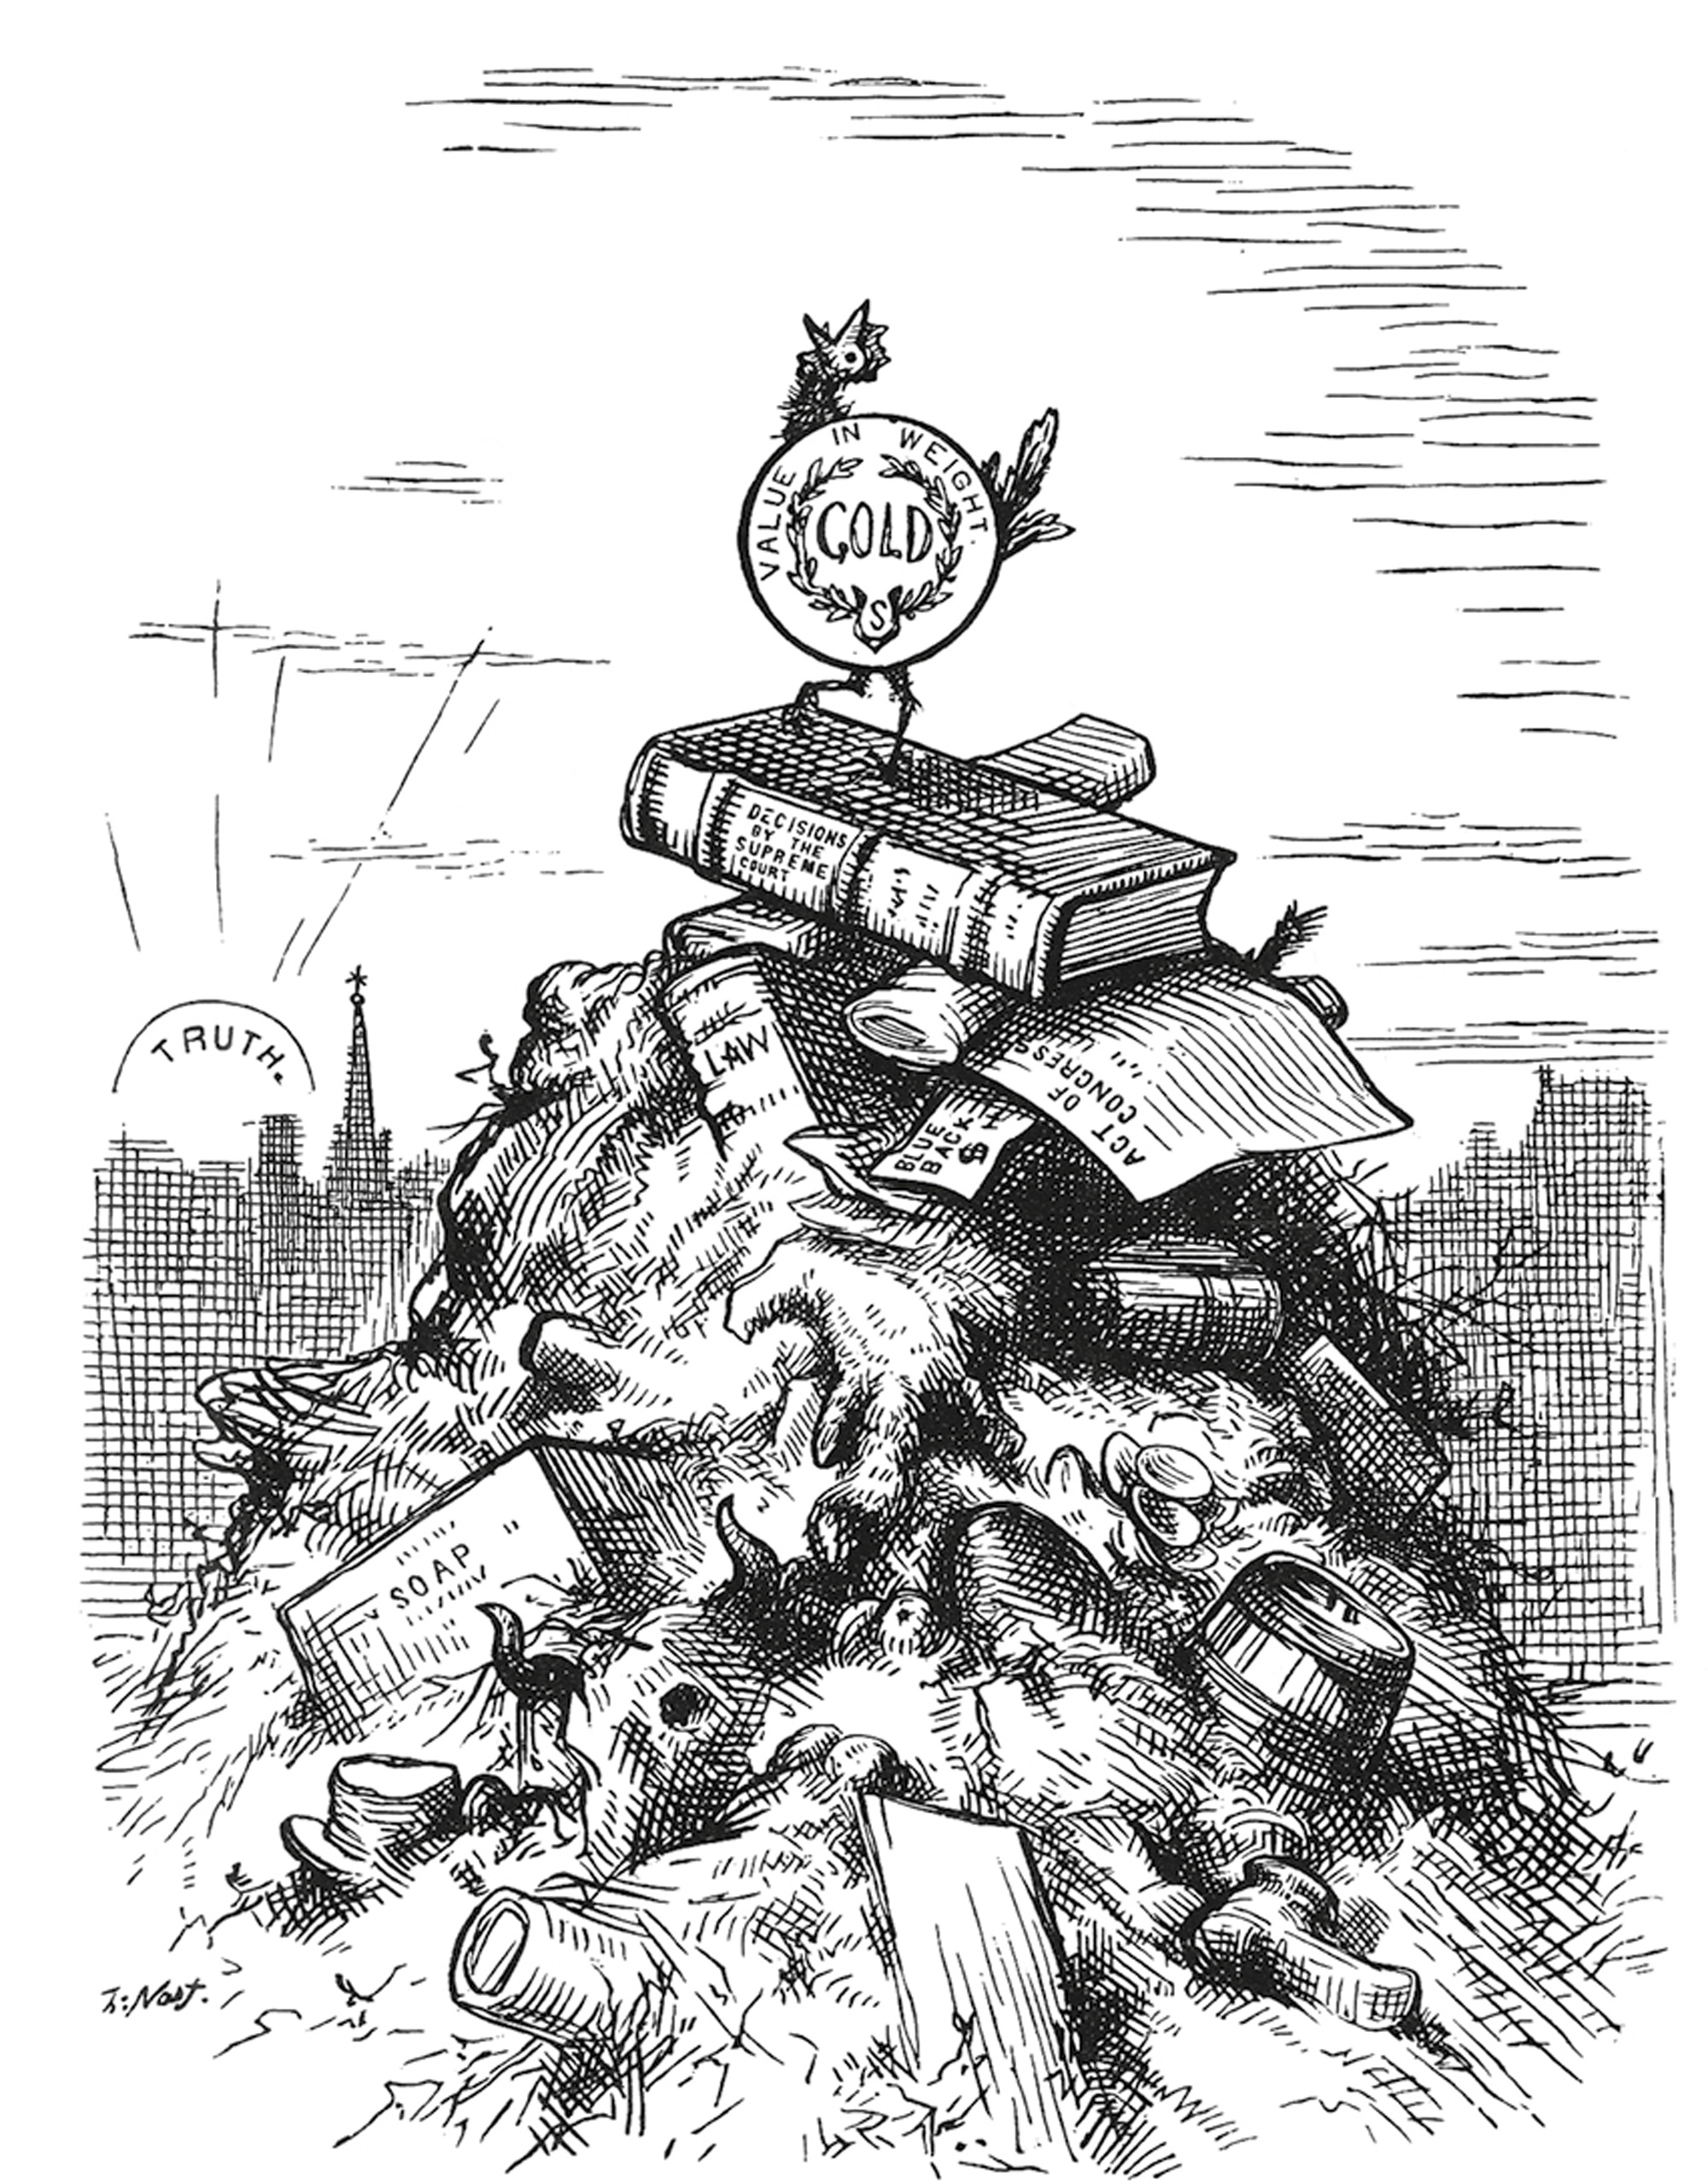 Thomas Nast, “Survival of the Fittest,” 1876. Cover for David Wells’s Robinson Crusoe’s Money.